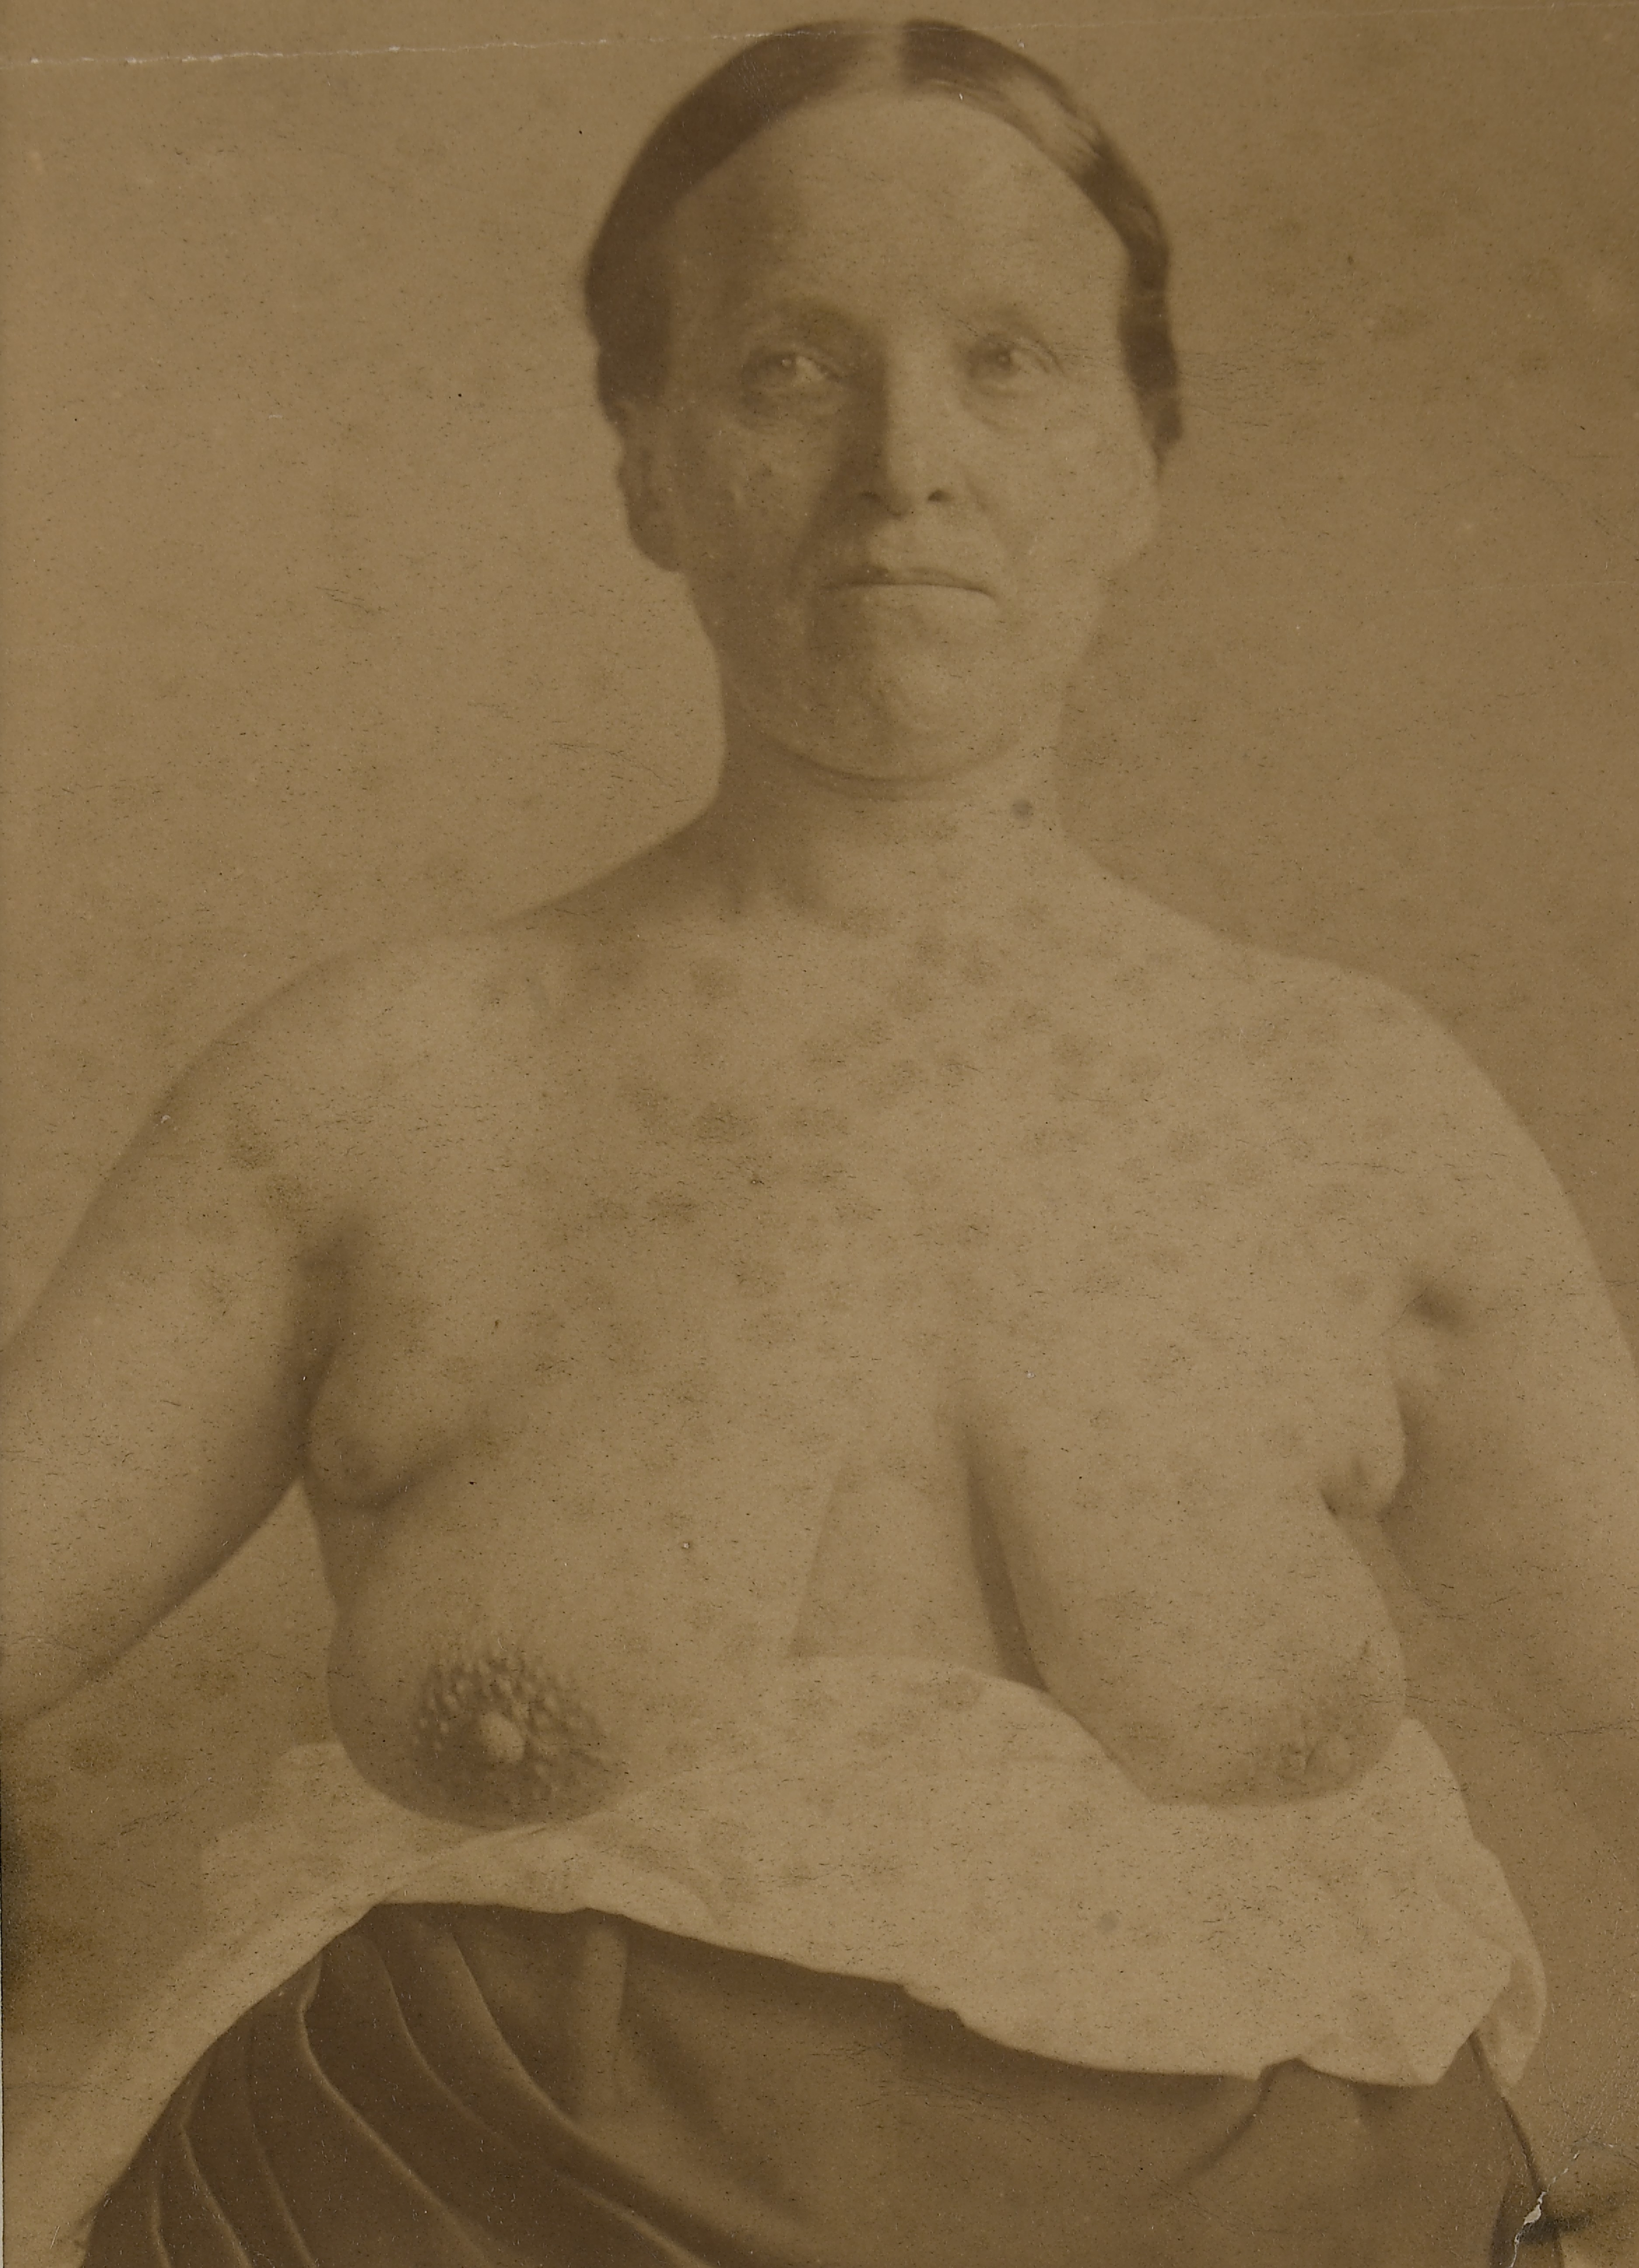 File:Woman with supernumery breasts and nipples Wellcome L0062997